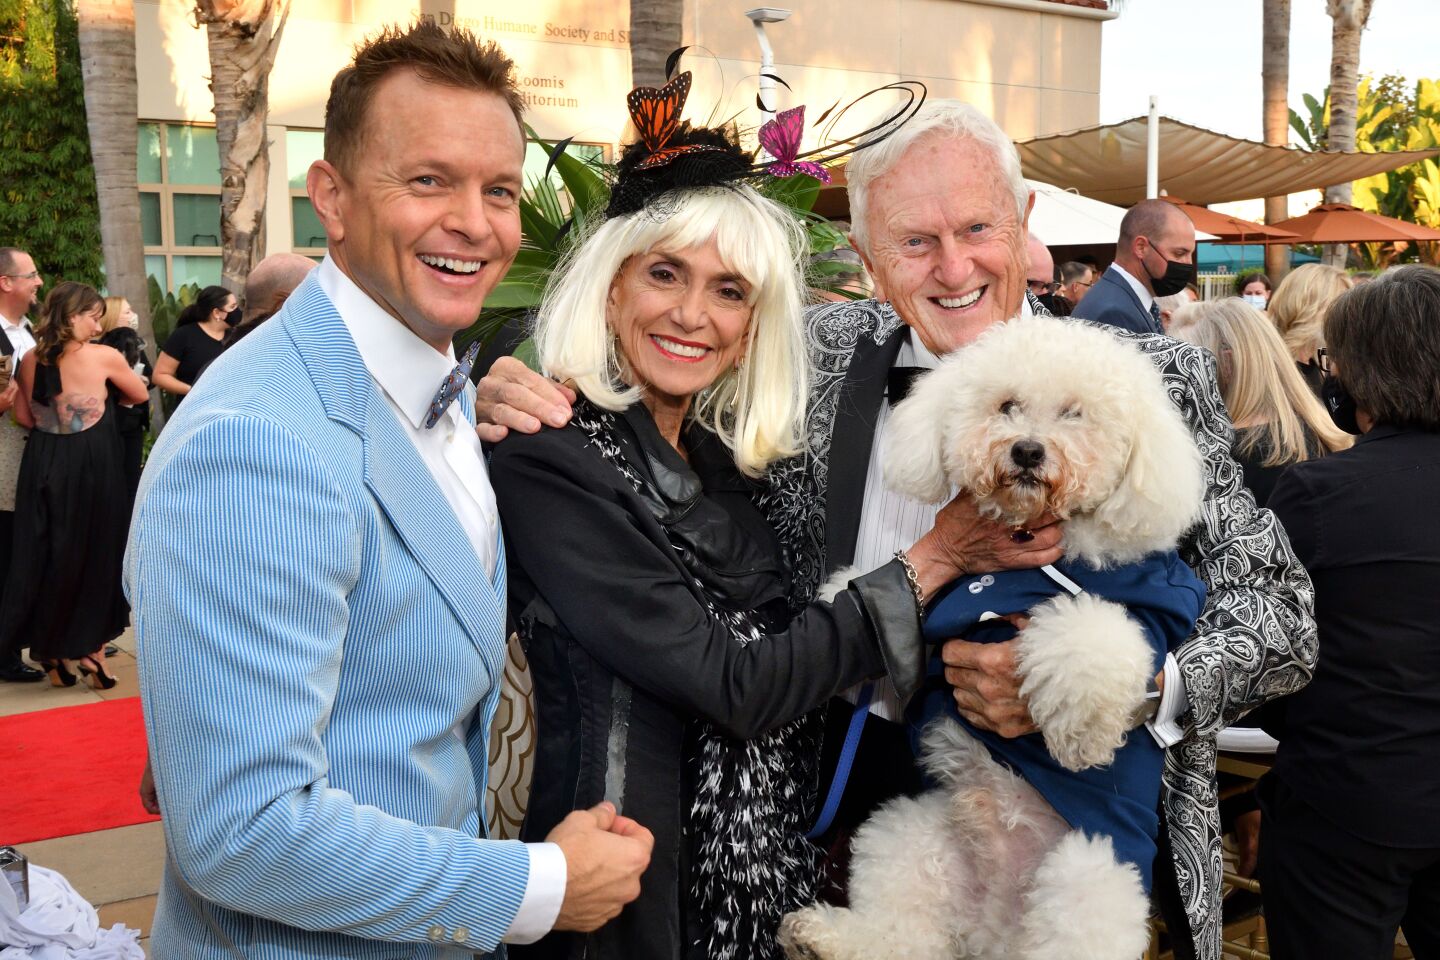 Ryan Jeffcoat, Joyce Gattas, Jay Jeffcoat and Buddy "the Wonder Dog" don their "old Hollywood" attire for the 35th annual Fur Ball presented by the San Diego Humane Society on Oct. 2.